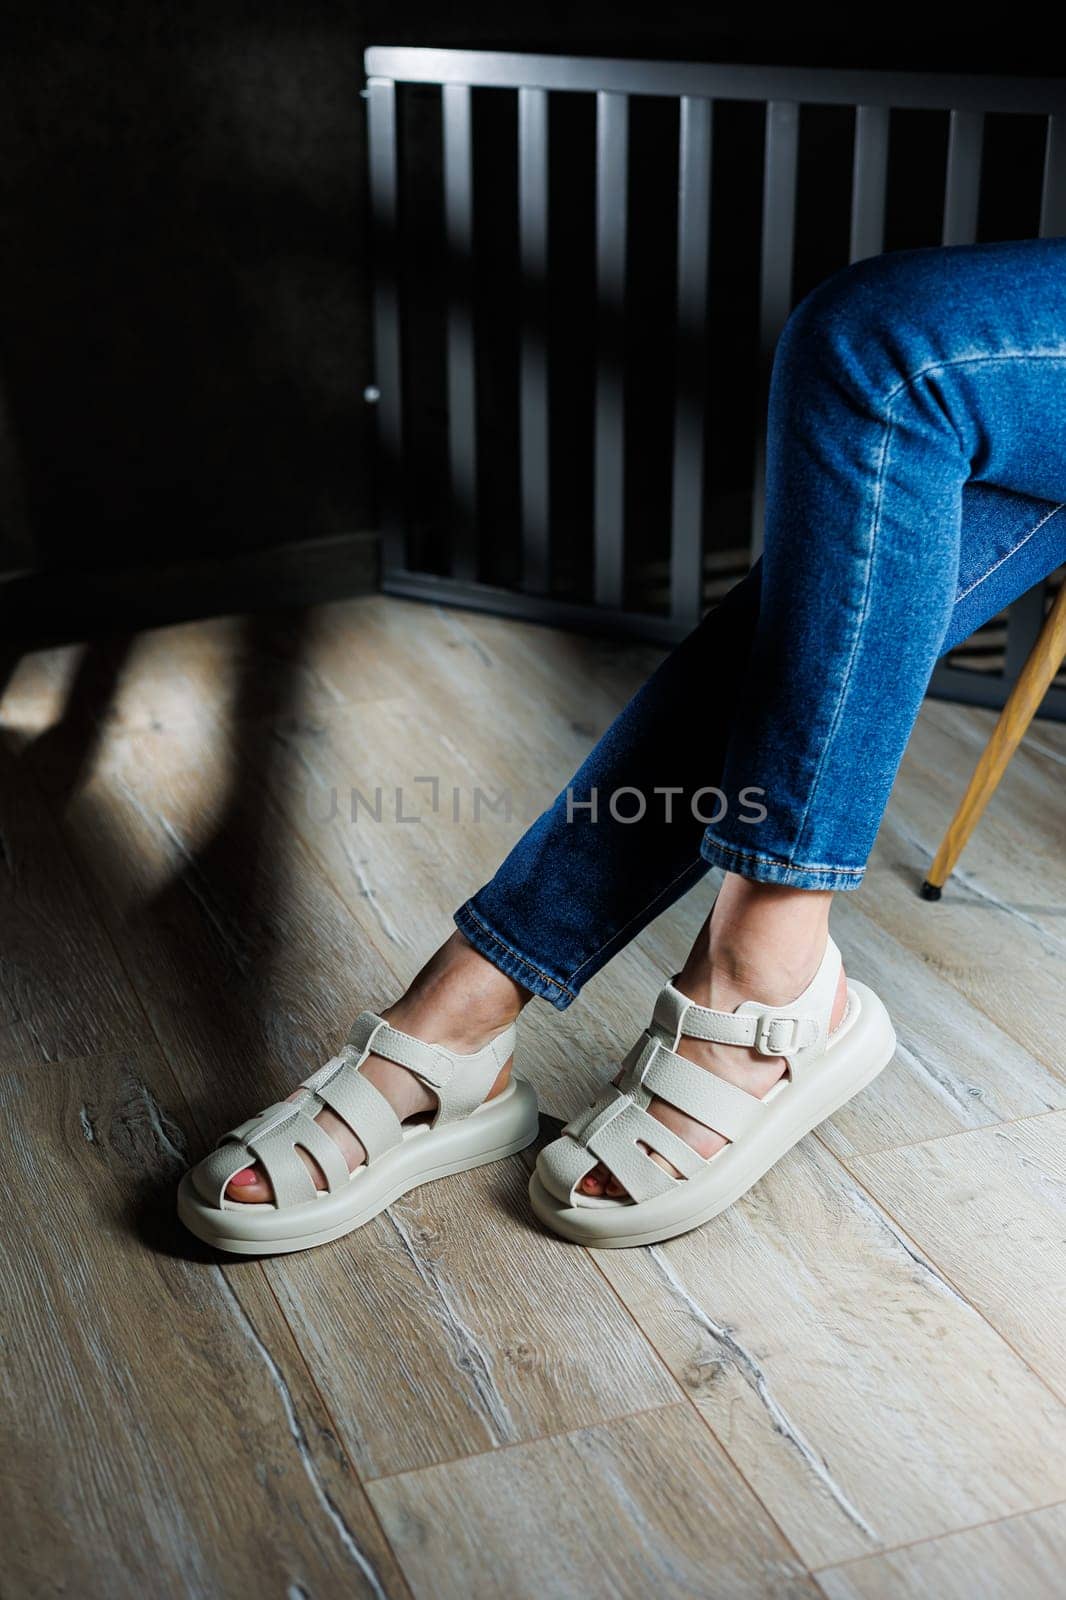 Slender female legs in beige leather sandals without heels. Collection of women's summer sandals. by Dmitrytph